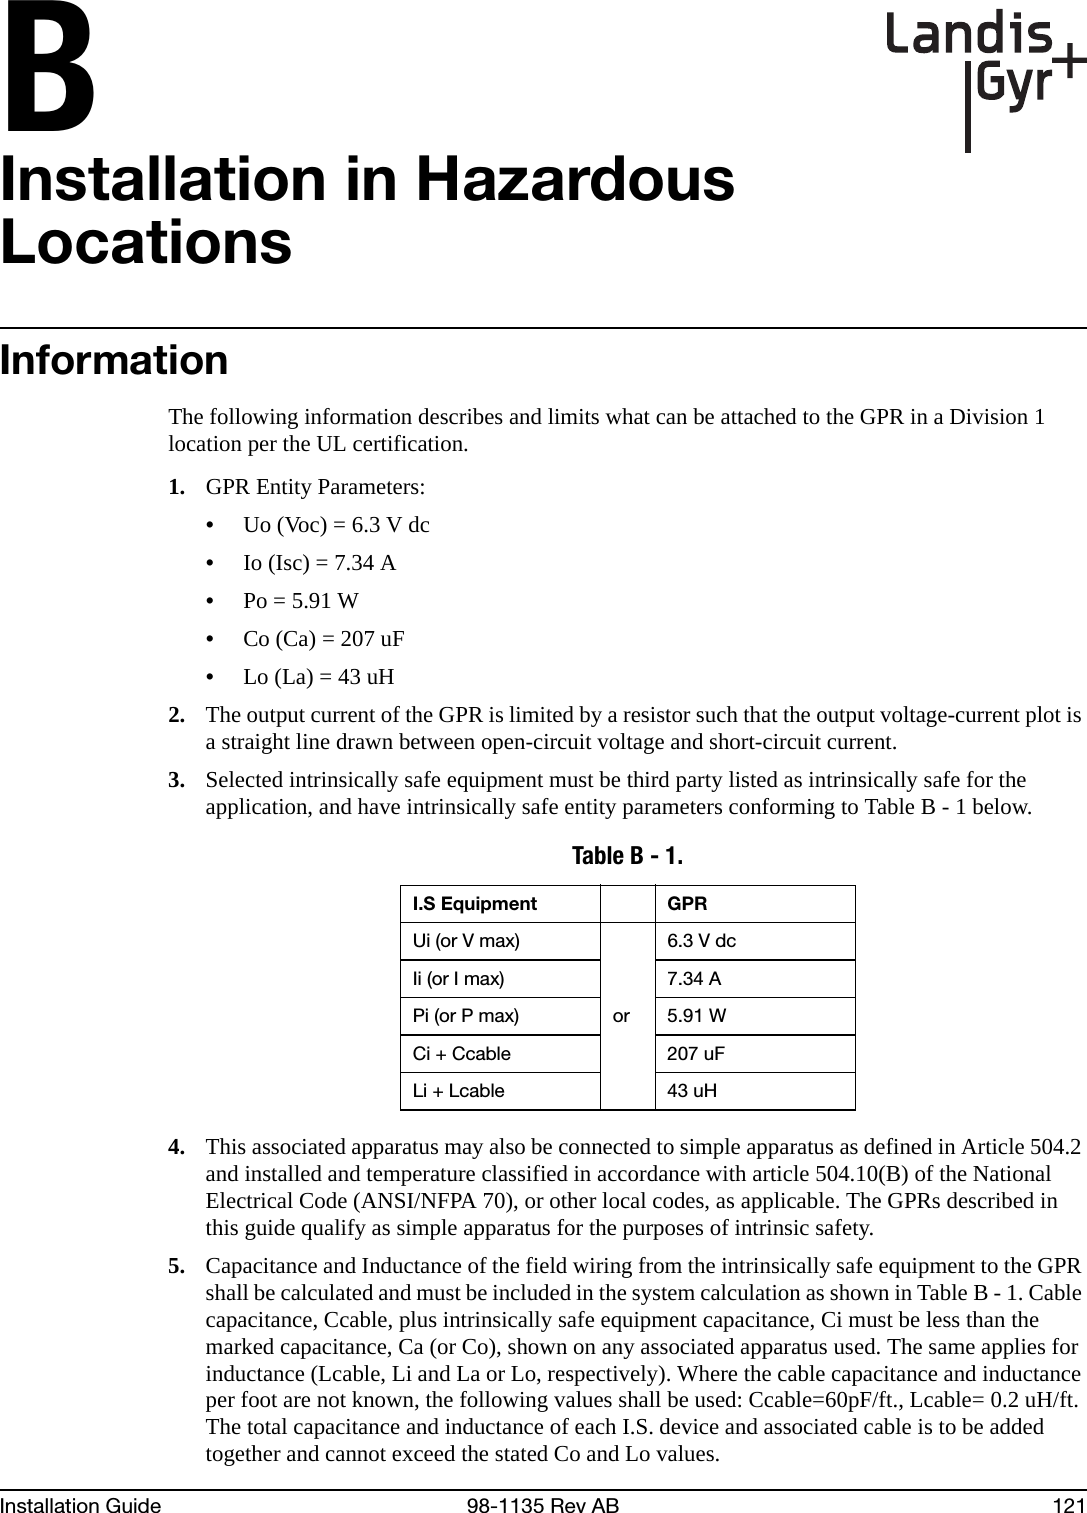 BInstallation Guide 98-1135 Rev AB 121Installation in Hazardous LocationsInformationThe following information describes and limits what can be attached to the GPR in a Division 1 location per the UL certification.1. GPR Entity Parameters:•Uo (Voc) = 6.3 V dc•Io (Isc) = 7.34 A•Po = 5.91 W•Co (Ca) = 207 uF•Lo (La) = 43 uH2. The output current of the GPR is limited by a resistor such that the output voltage-current plot is a straight line drawn between open-circuit voltage and short-circuit current.3. Selected intrinsically safe equipment must be third party listed as intrinsically safe for the application, and have intrinsically safe entity parameters conforming to Table B - 1 below.4. This associated apparatus may also be connected to simple apparatus as defined in Article 504.2 and installed and temperature classified in accordance with article 504.10(B) of the National Electrical Code (ANSI/NFPA 70), or other local codes, as applicable. The GPRs described in this guide qualify as simple apparatus for the purposes of intrinsic safety.5. Capacitance and Inductance of the field wiring from the intrinsically safe equipment to the GPR shall be calculated and must be included in the system calculation as shown in Table B - 1. Cable capacitance, Ccable, plus intrinsically safe equipment capacitance, Ci must be less than the marked capacitance, Ca (or Co), shown on any associated apparatus used. The same applies for inductance (Lcable, Li and La or Lo, respectively). Where the cable capacitance and inductance per foot are not known, the following values shall be used: Ccable=60pF/ft., Lcable= 0.2 uH/ft. The total capacitance and inductance of each I.S. device and associated cable is to be added together and cannot exceed the stated Co and Lo values.Table B - 1. I.S Equipment GPRUi (or V max)or6.3 V dcIi (or I max) 7.34 APi (or P max) 5.91 WCi + Ccable 207 uFLi + Lcable 43 uH